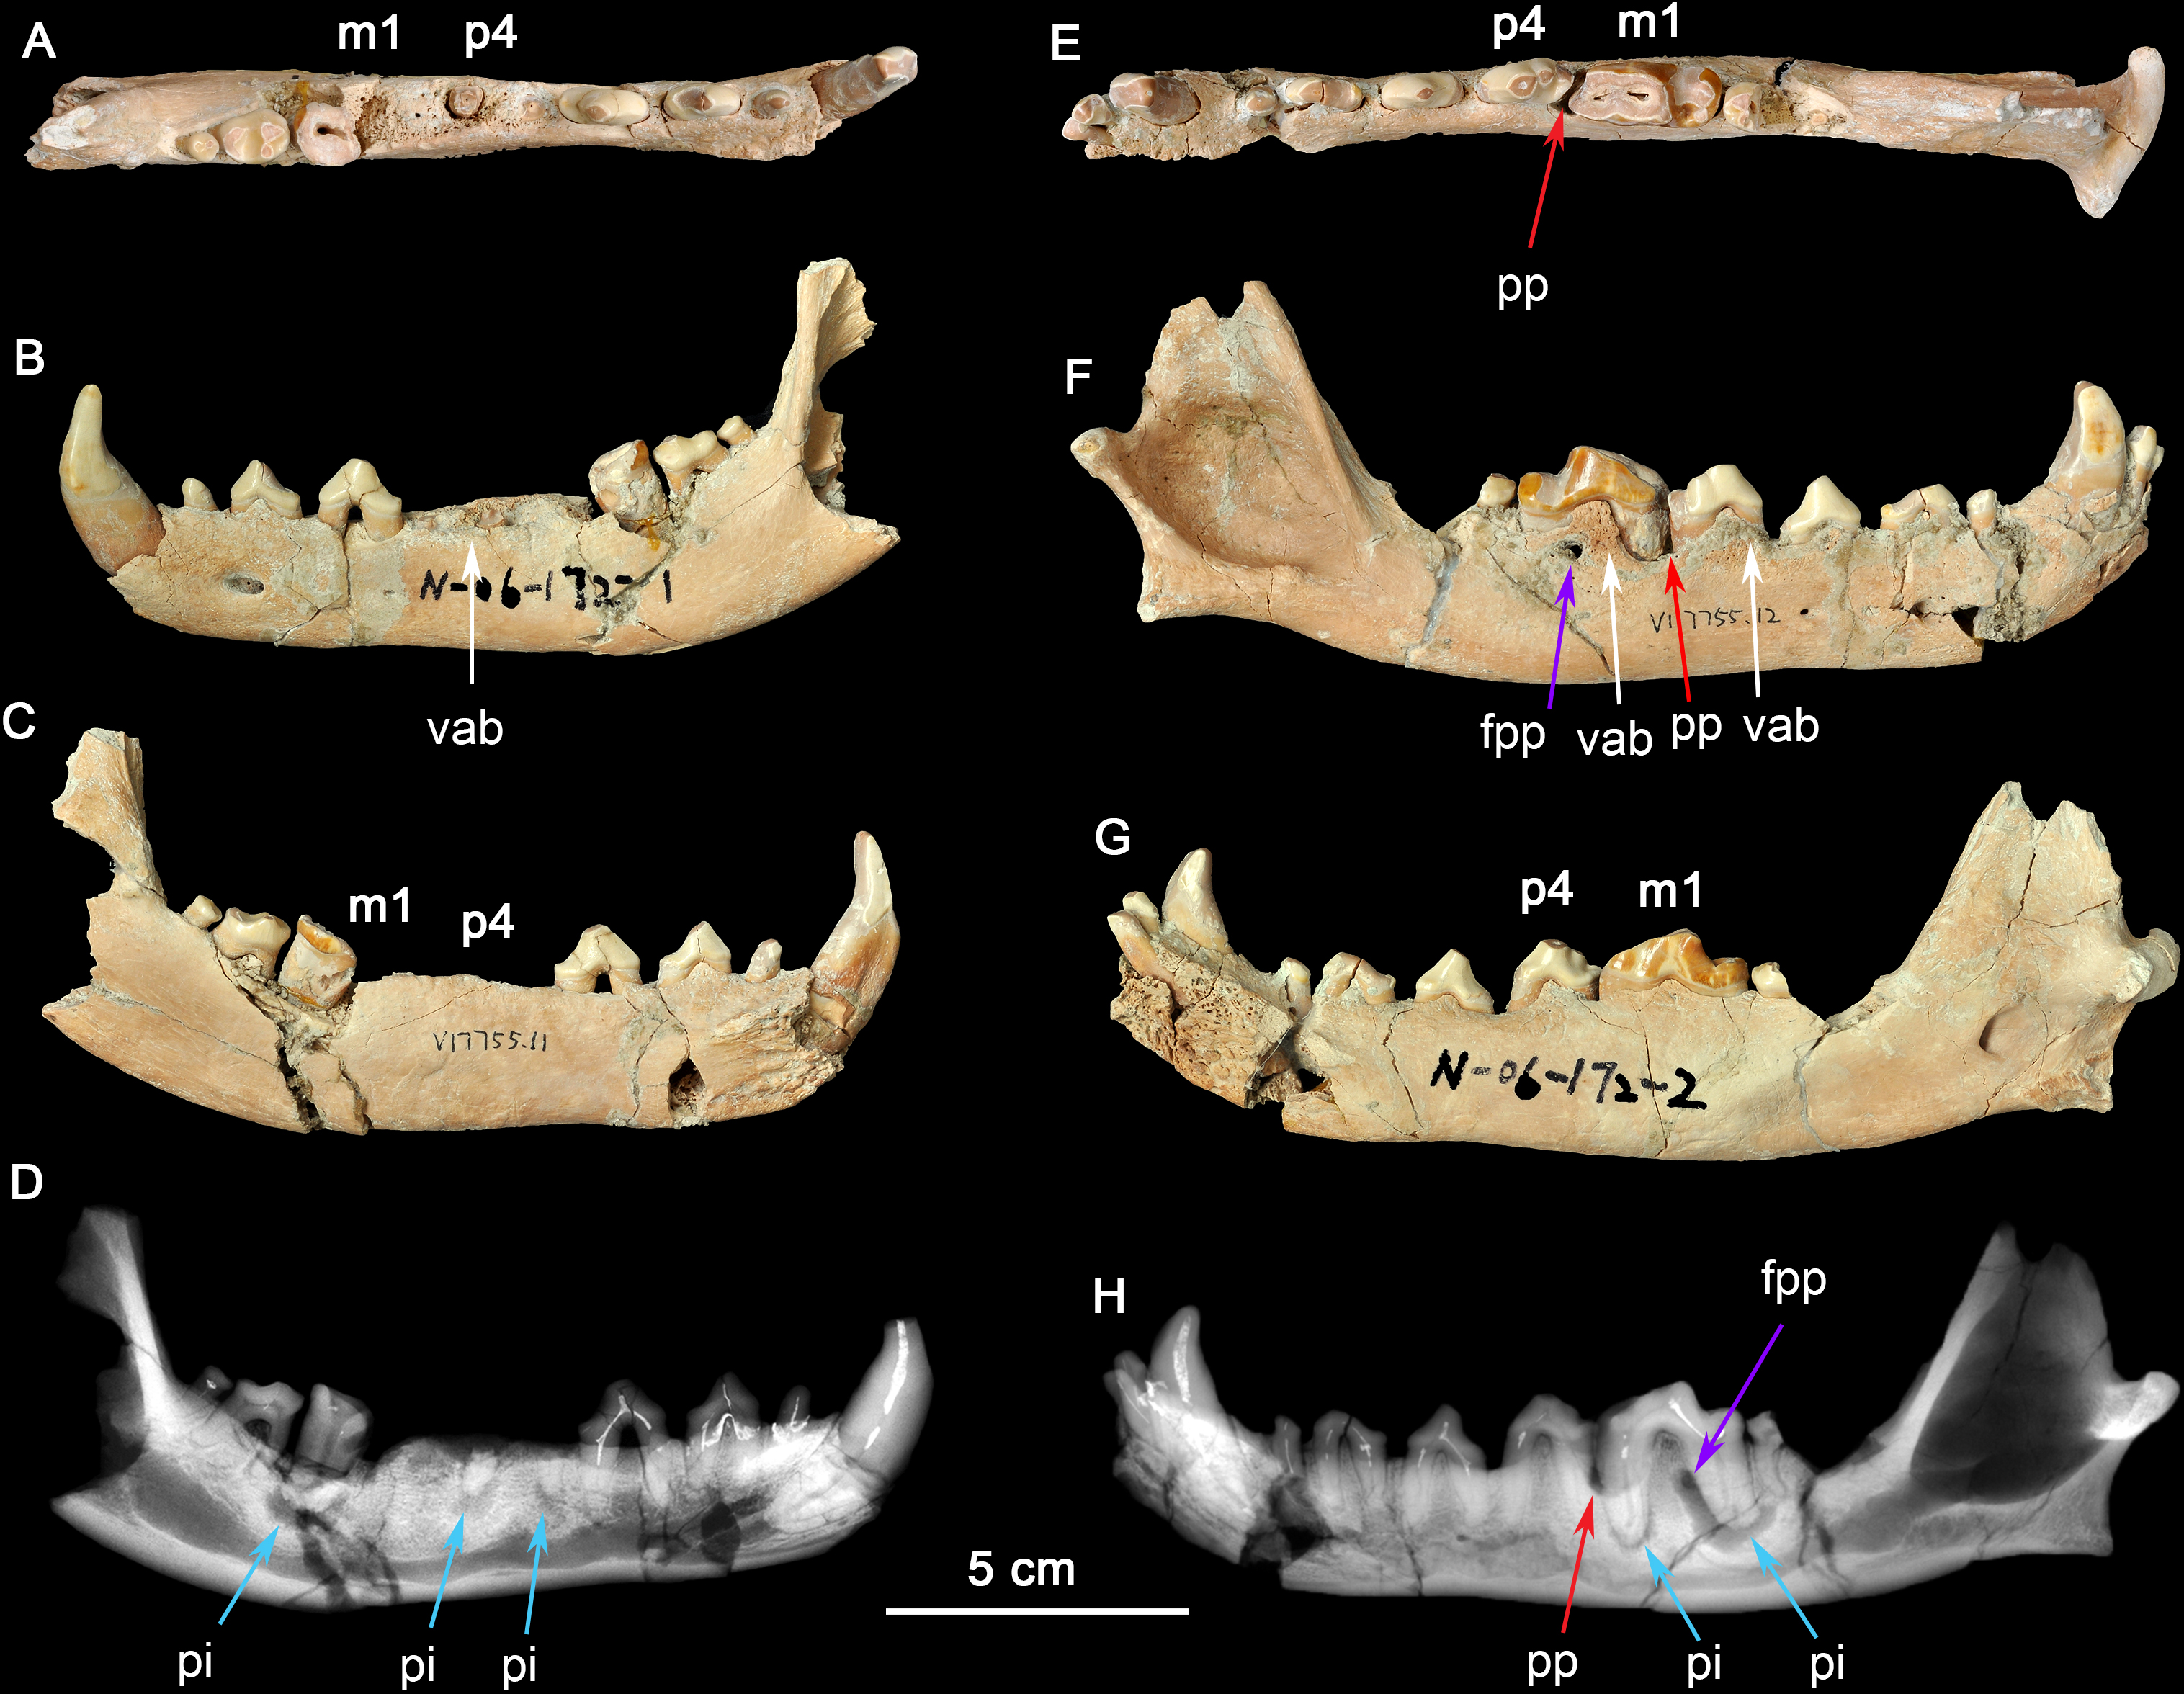 Hypercarnivorous teeth and healed injuries to Canis chihliensis from Early  Pleistocene Nihewan beds, China, support social hunting for ancestral  wolves [PeerJ]